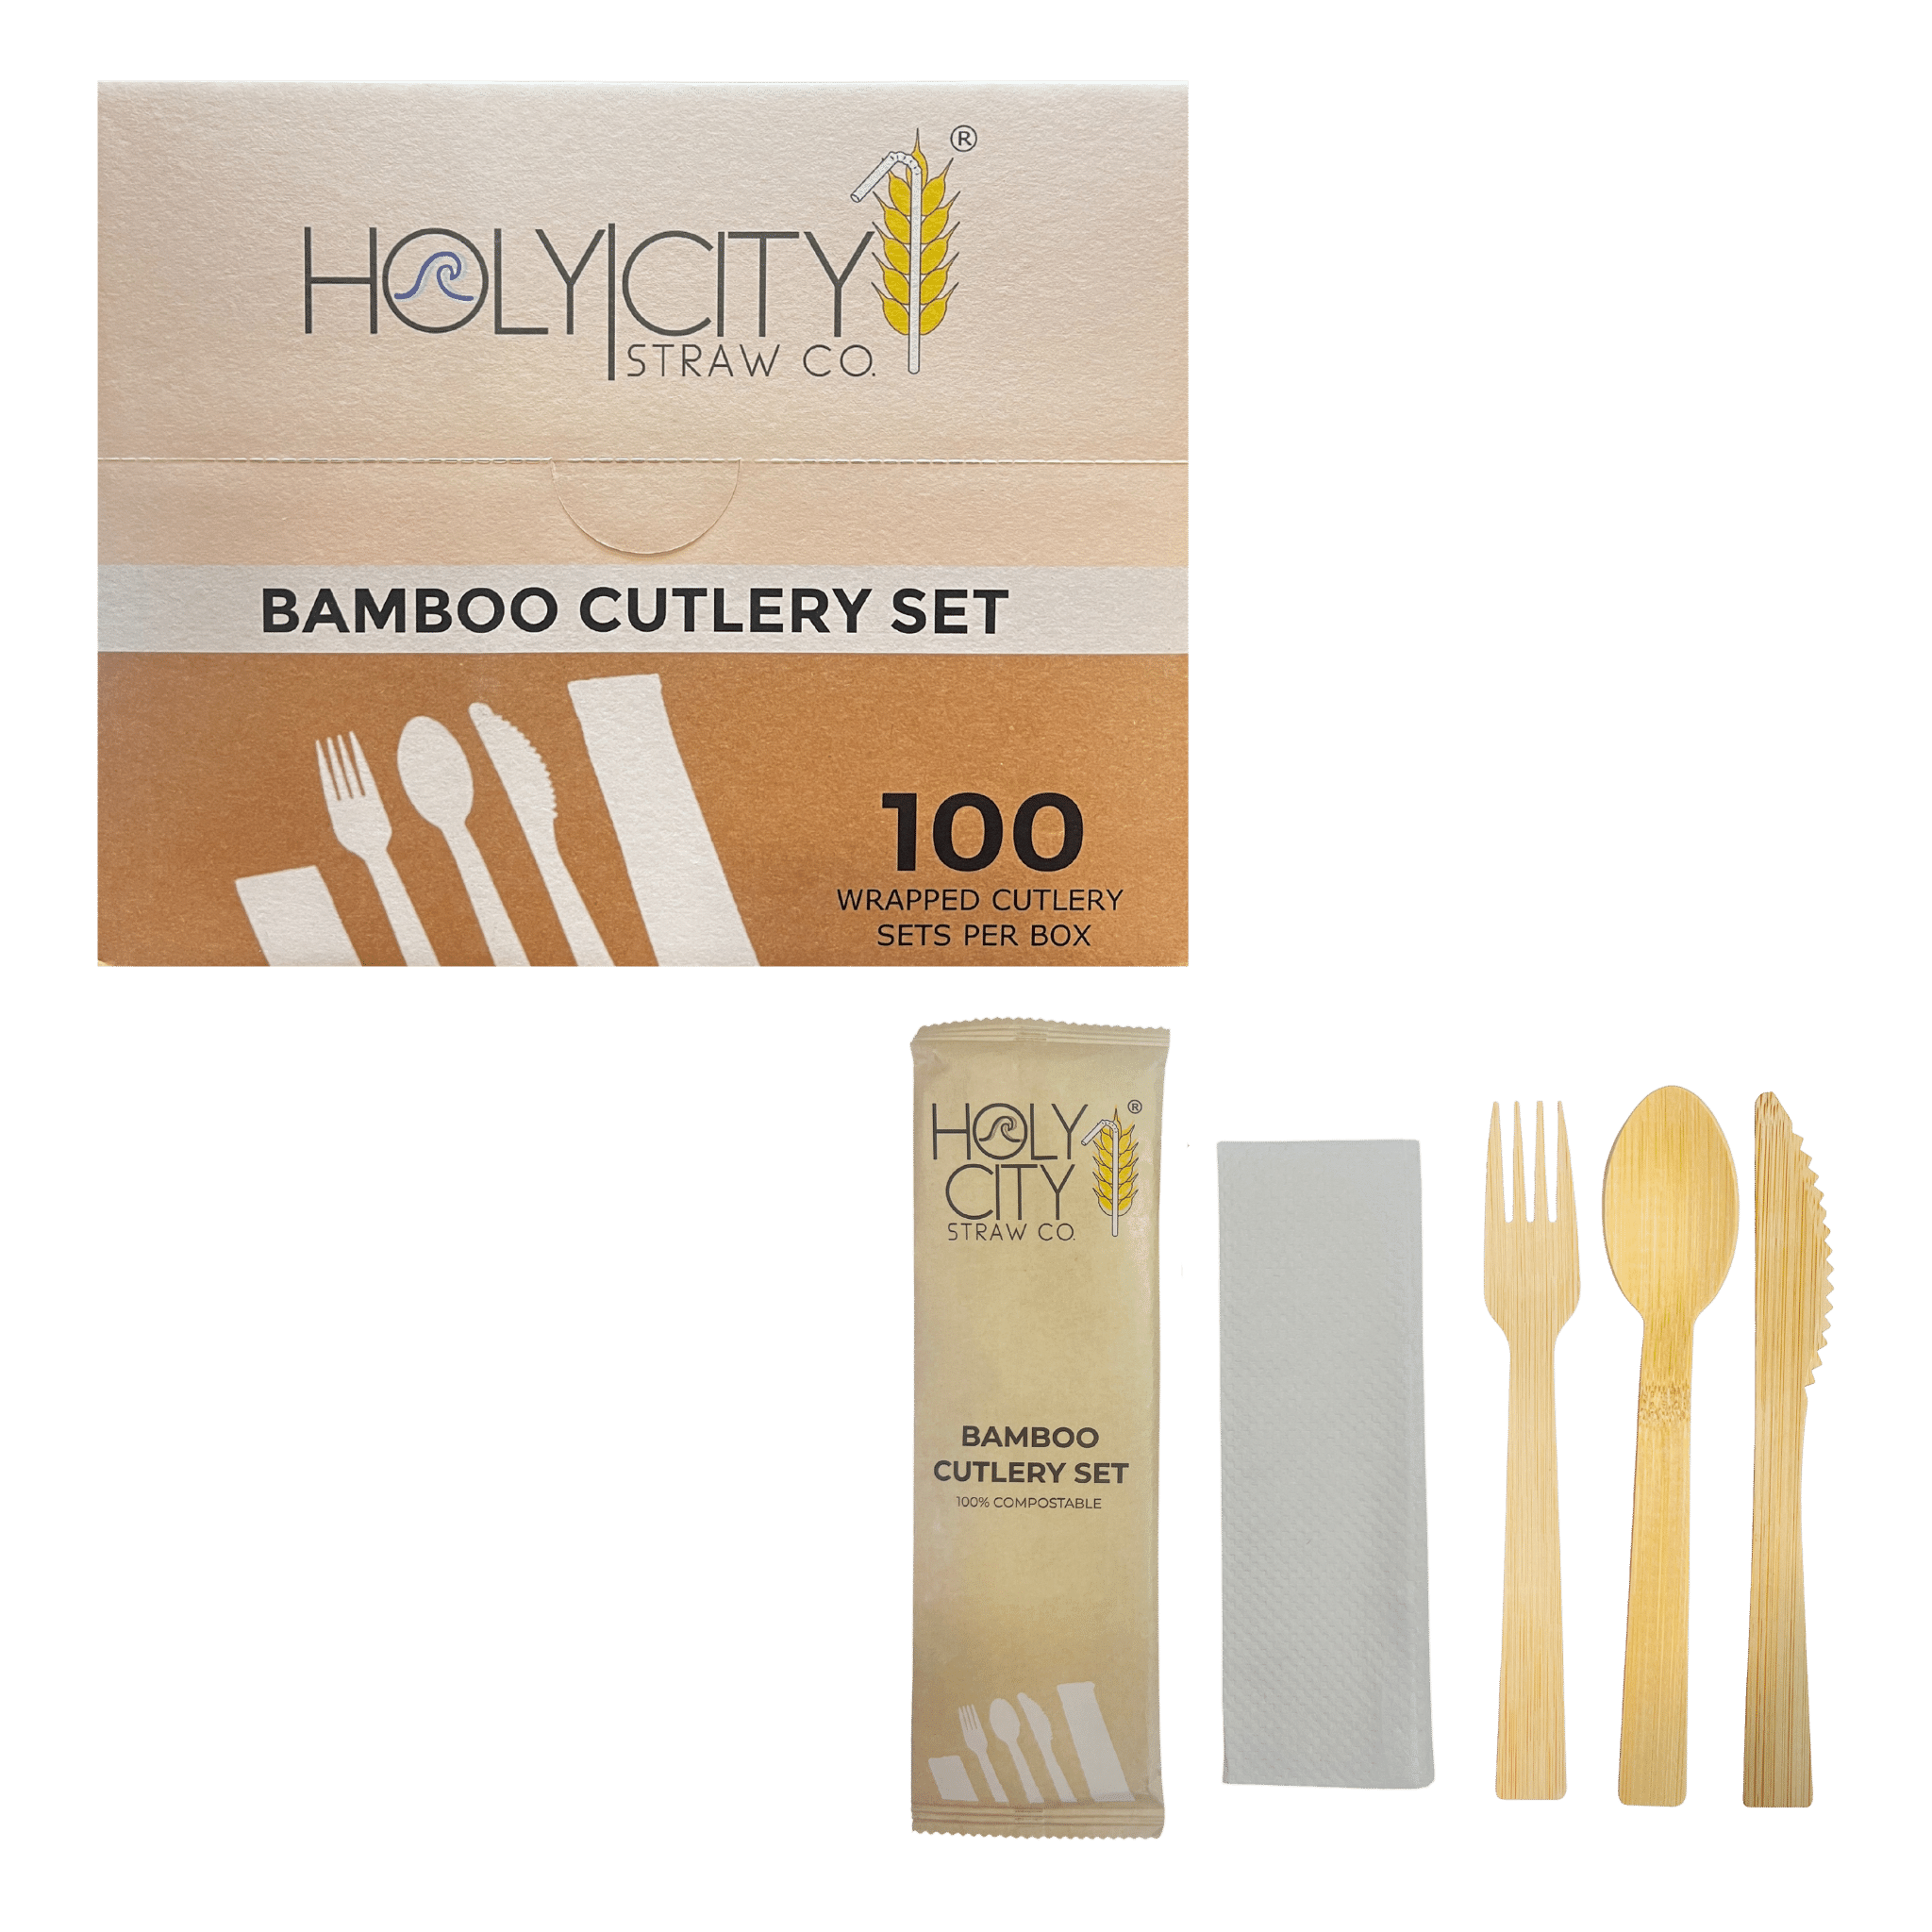 100ct Bamboo Cutlery Set by Holy City Straw Co, 100% Compostable Wrapped Utensils, Eco-Friendly Disposable Fork, Knife, and Spoon with Napkin